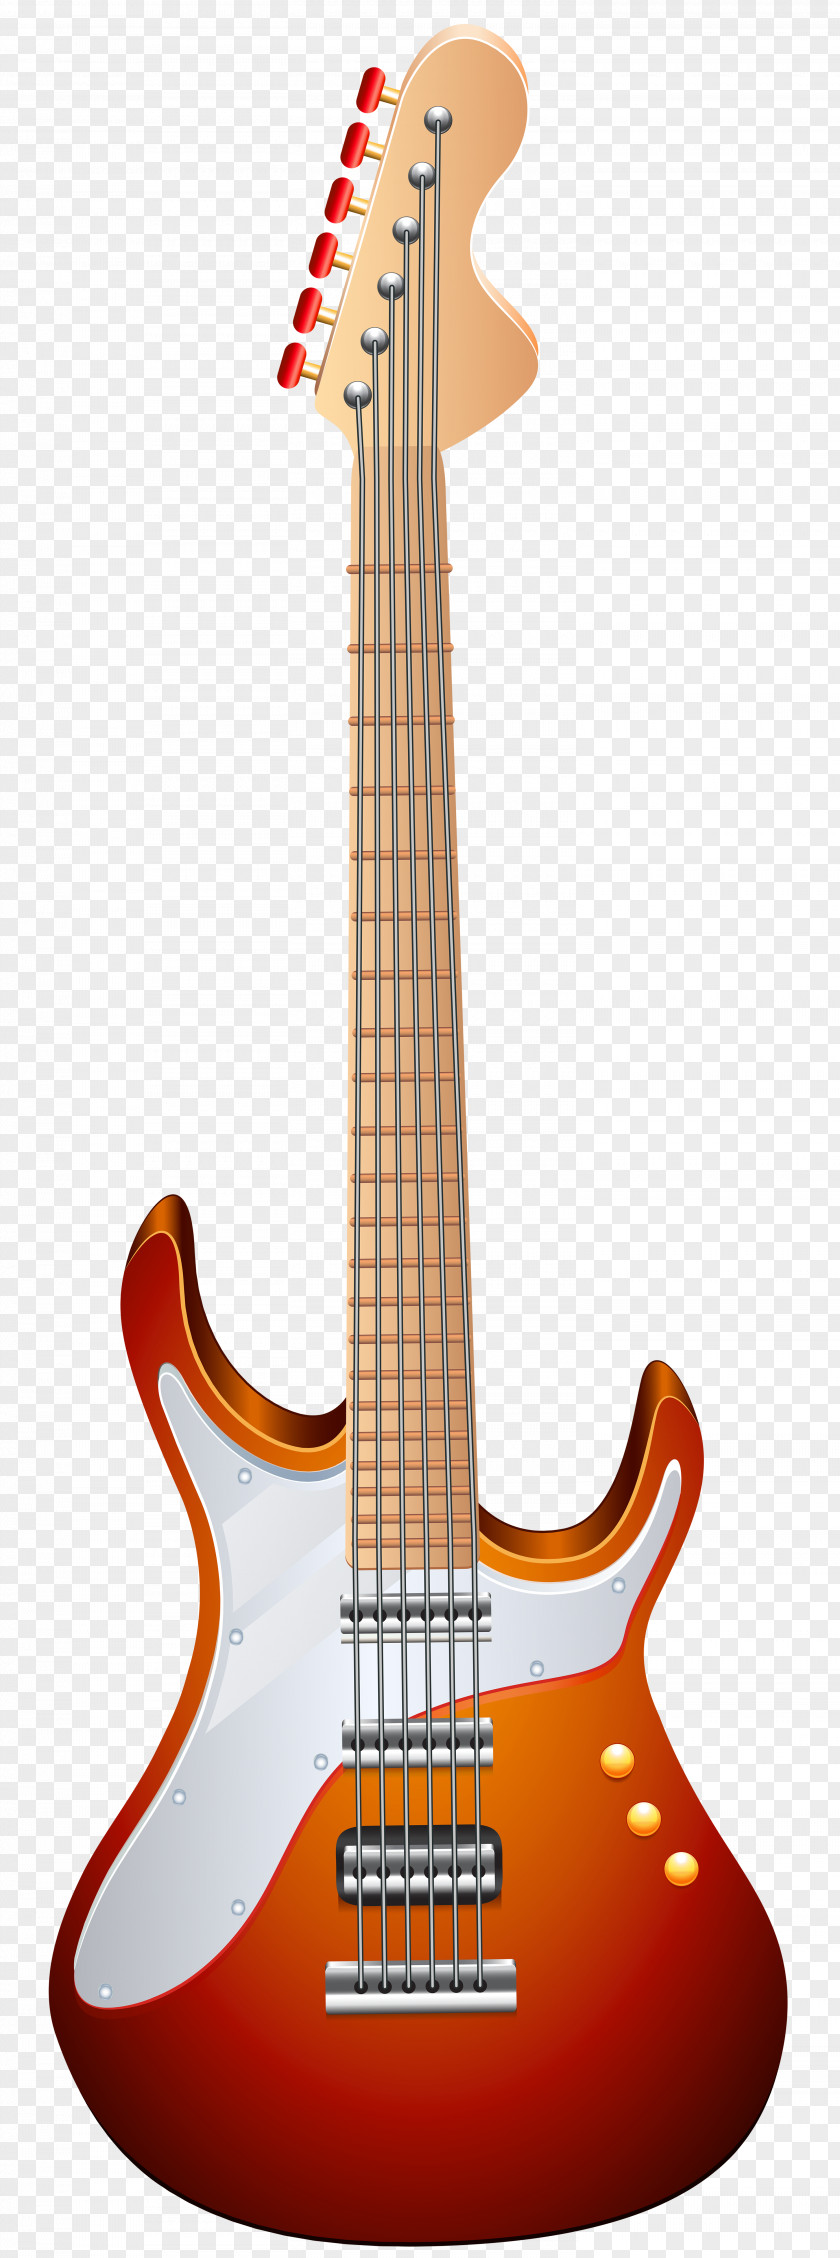 Guitar Electric Musical Instruments Acoustic String PNG